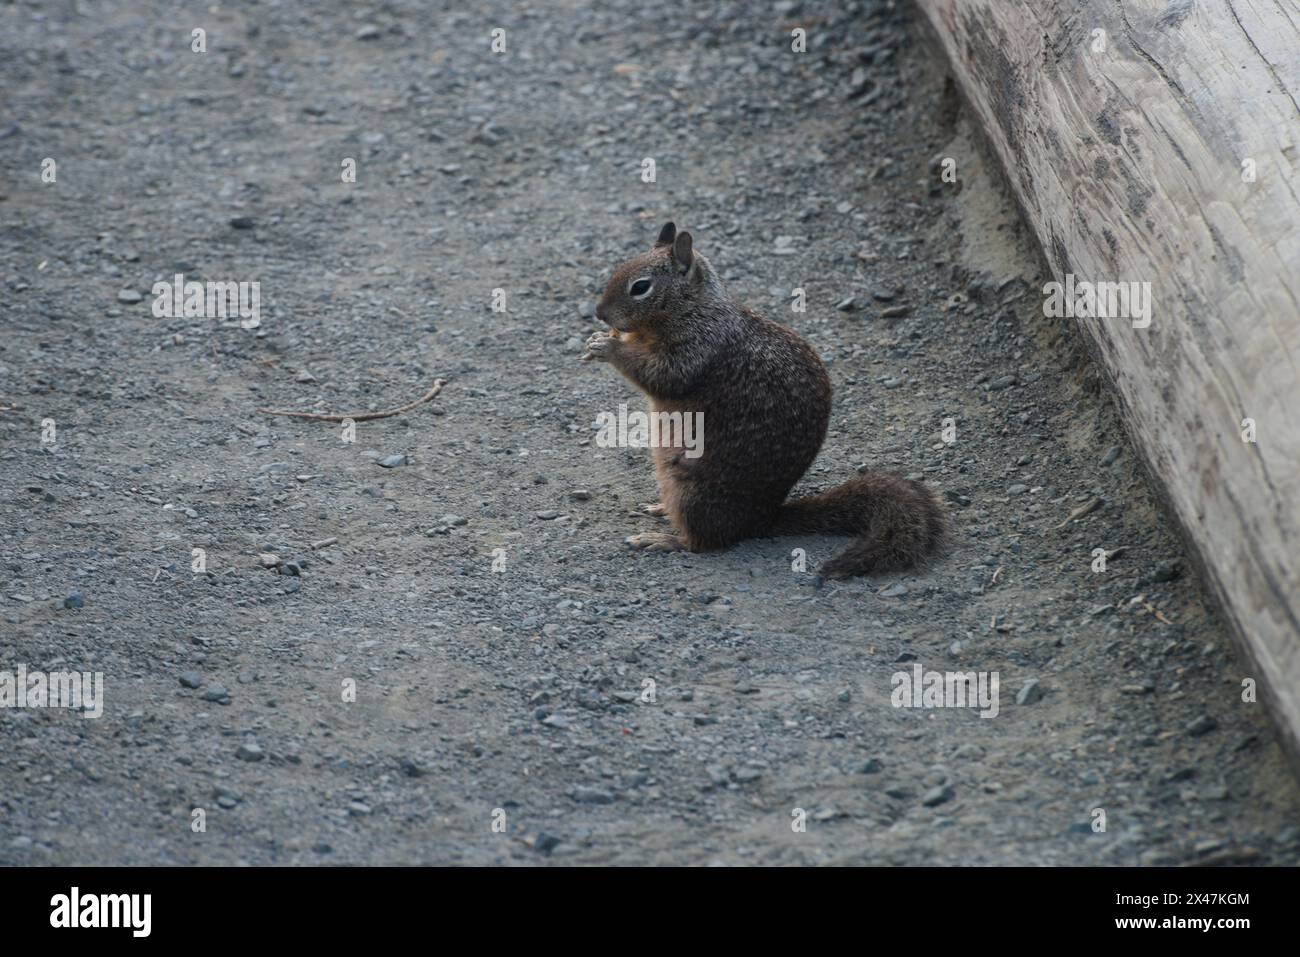 Cute & adorable brown ground squirrel eat food, at observation area of elephant seal sanctuary. Top travel destination Sam Simeon, CA. Stock Photo